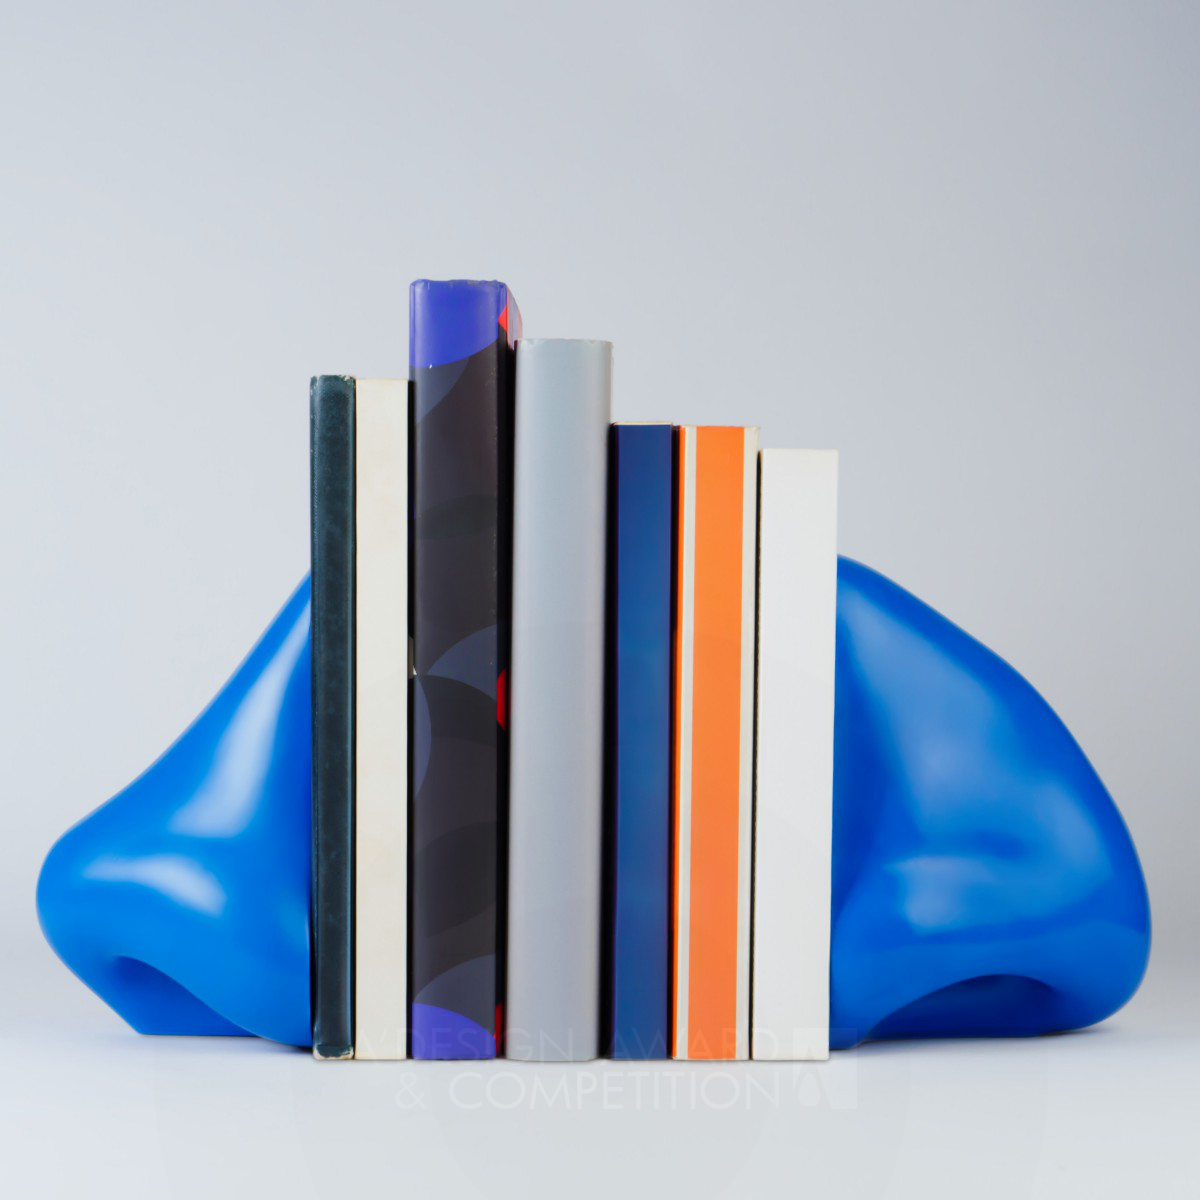 Nose Bookend